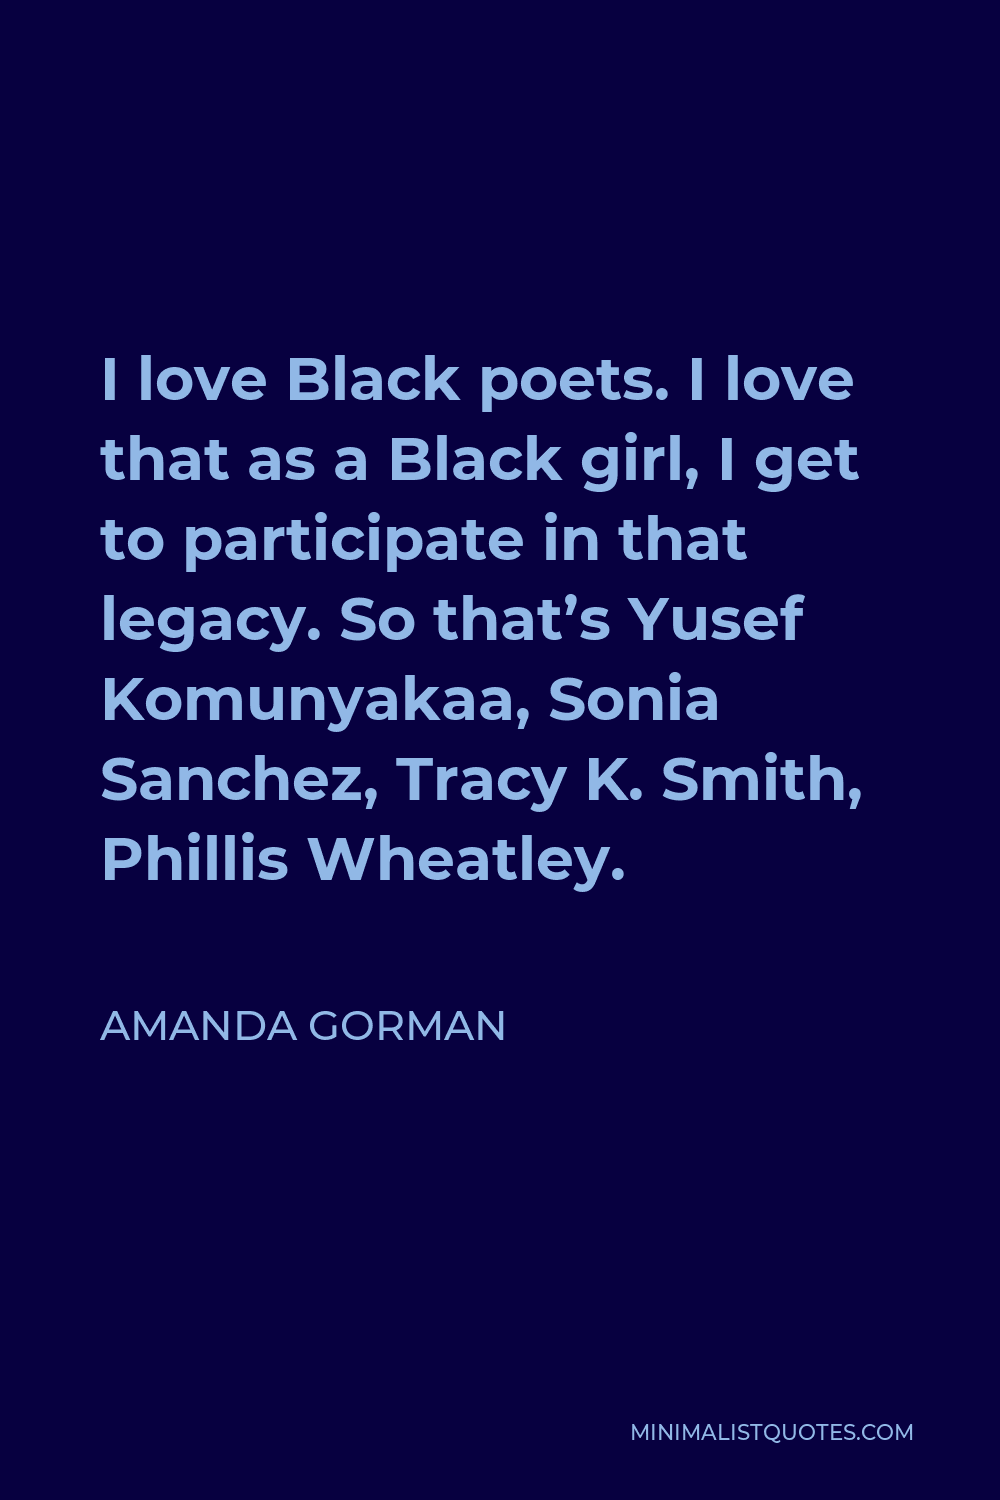 Amanda Gorman Quote - I love Black poets. I love that as a Black girl, I get to participate in that legacy. So that’s Yusef Komunyakaa, Sonia Sanchez, Tracy K. Smith, Phillis Wheatley.